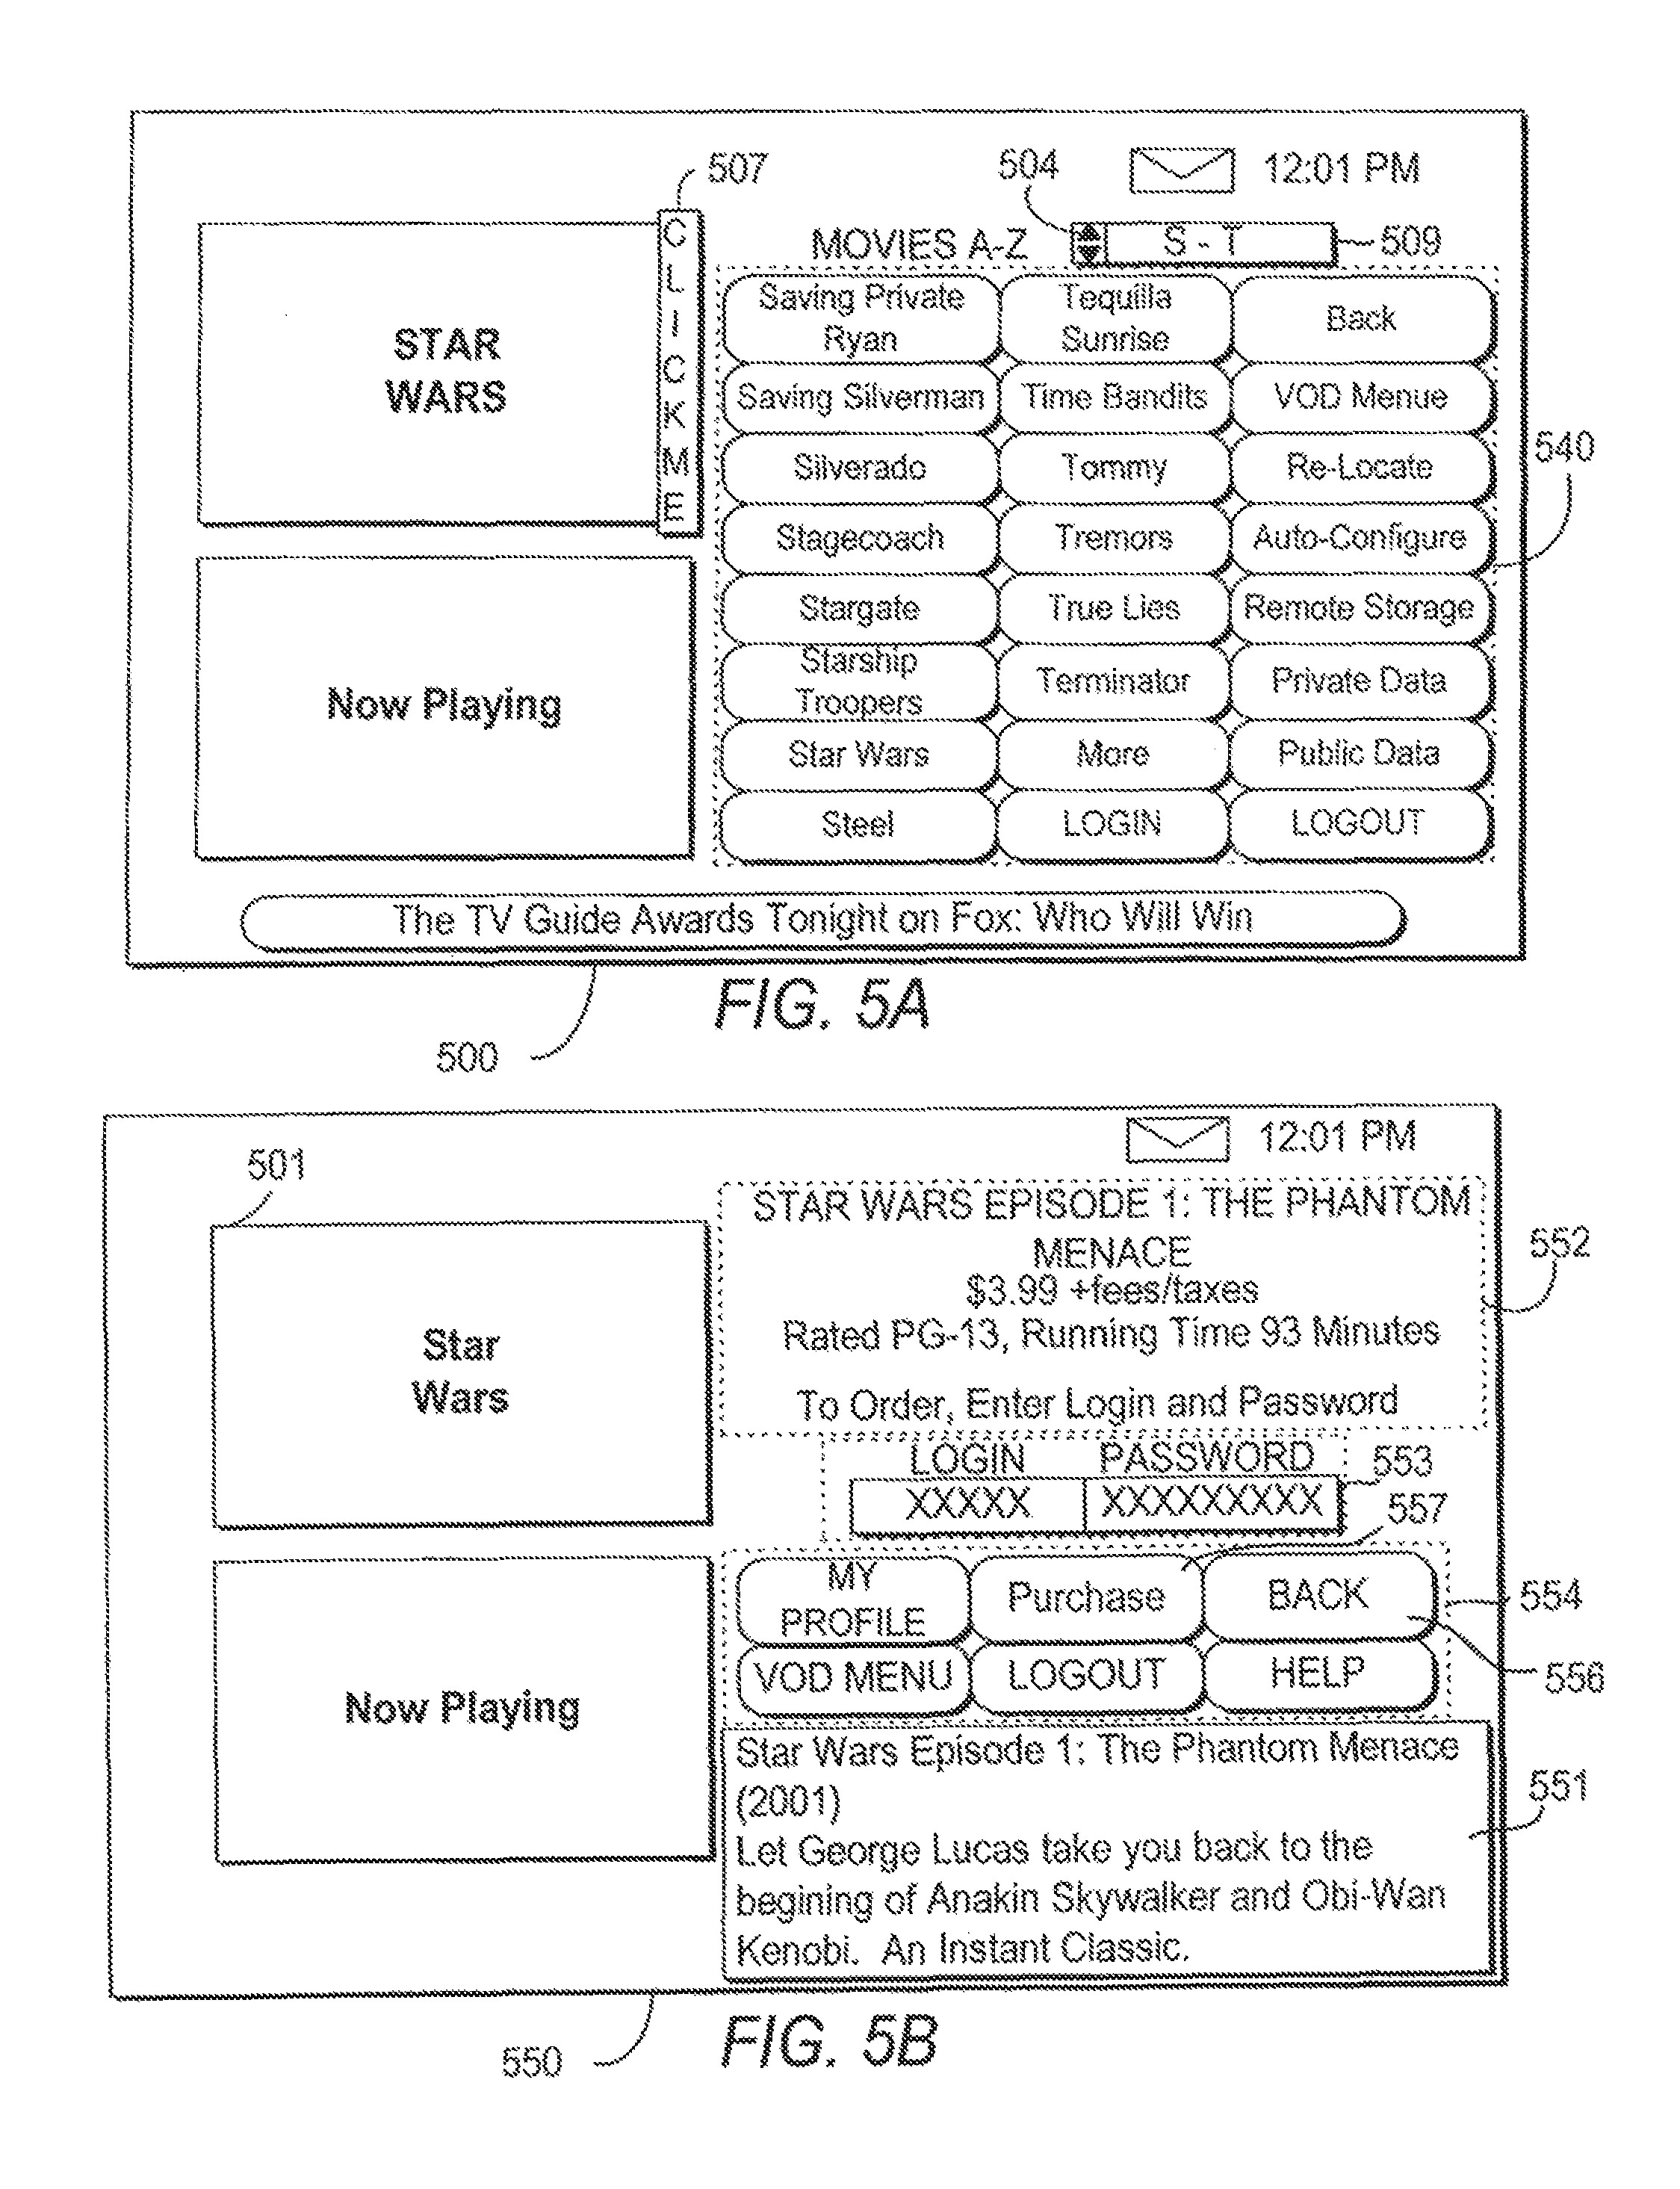 us9462317b2 systems and methods for providing storage of data on servers in an on demand media delivery system google patents